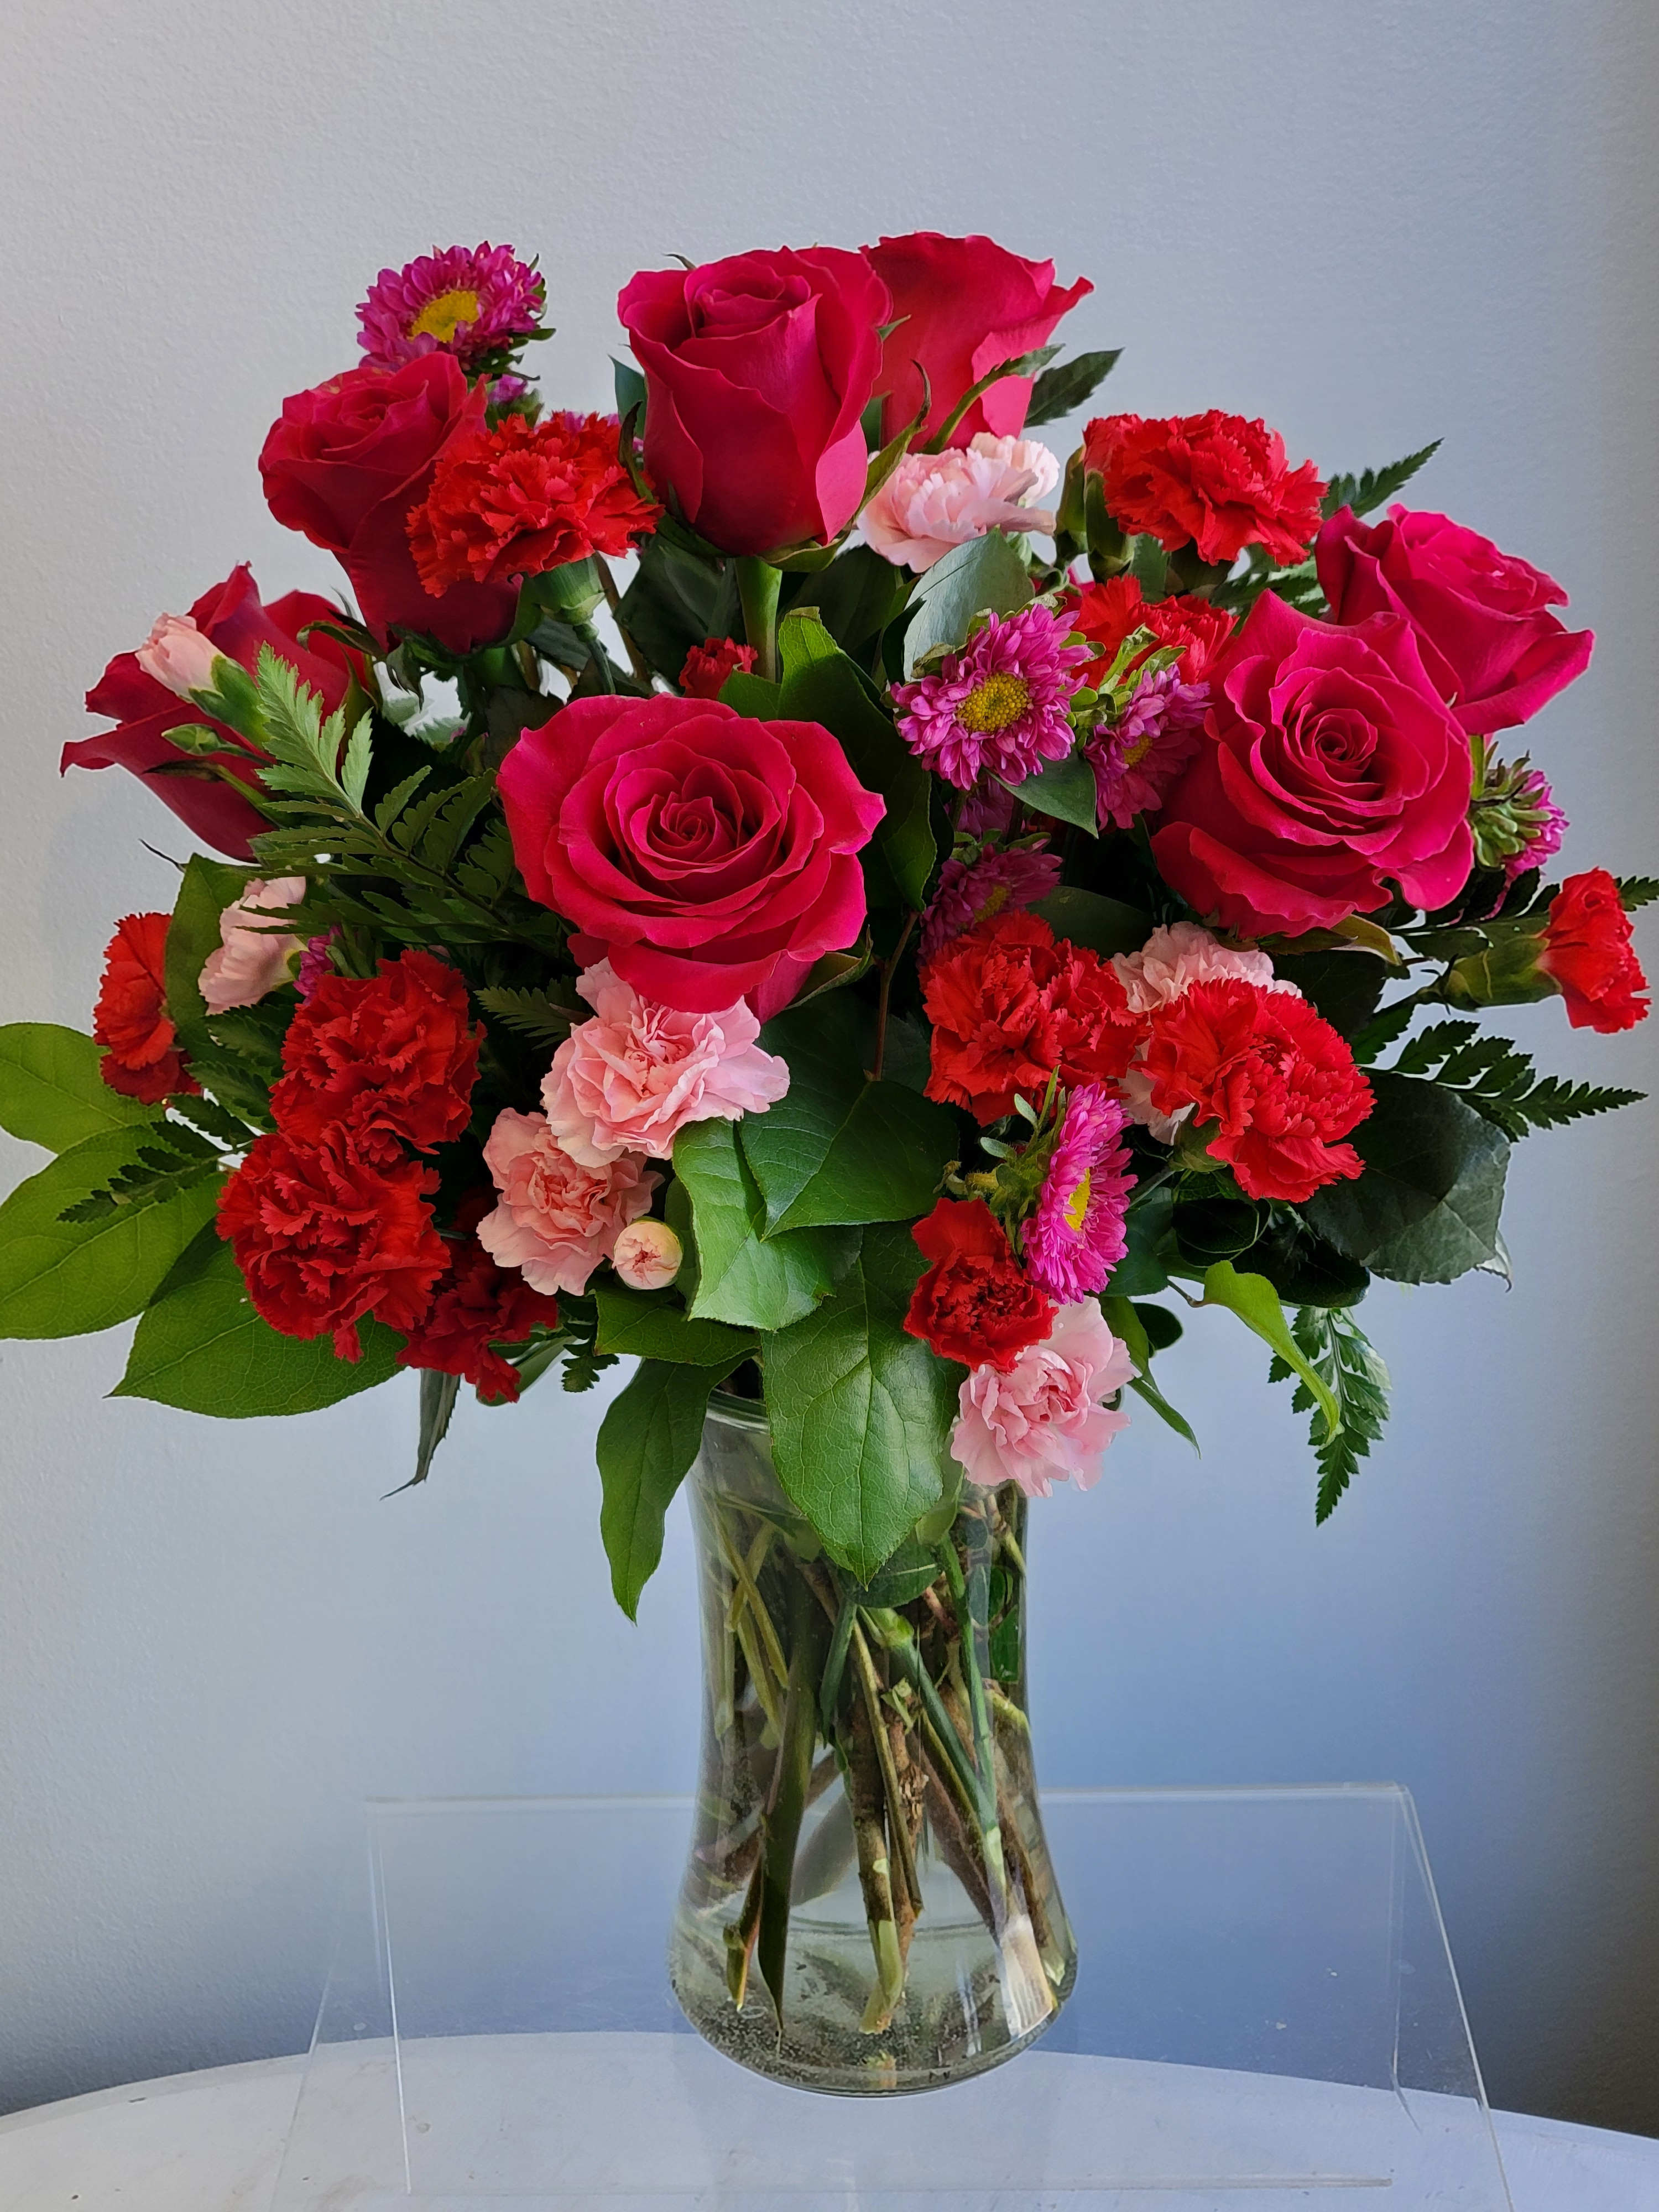 The Pink Floyd - Bright pink roses, Matsumoto asters, pink and red mini carnations arranged with mixed greens in a clear gathering vase